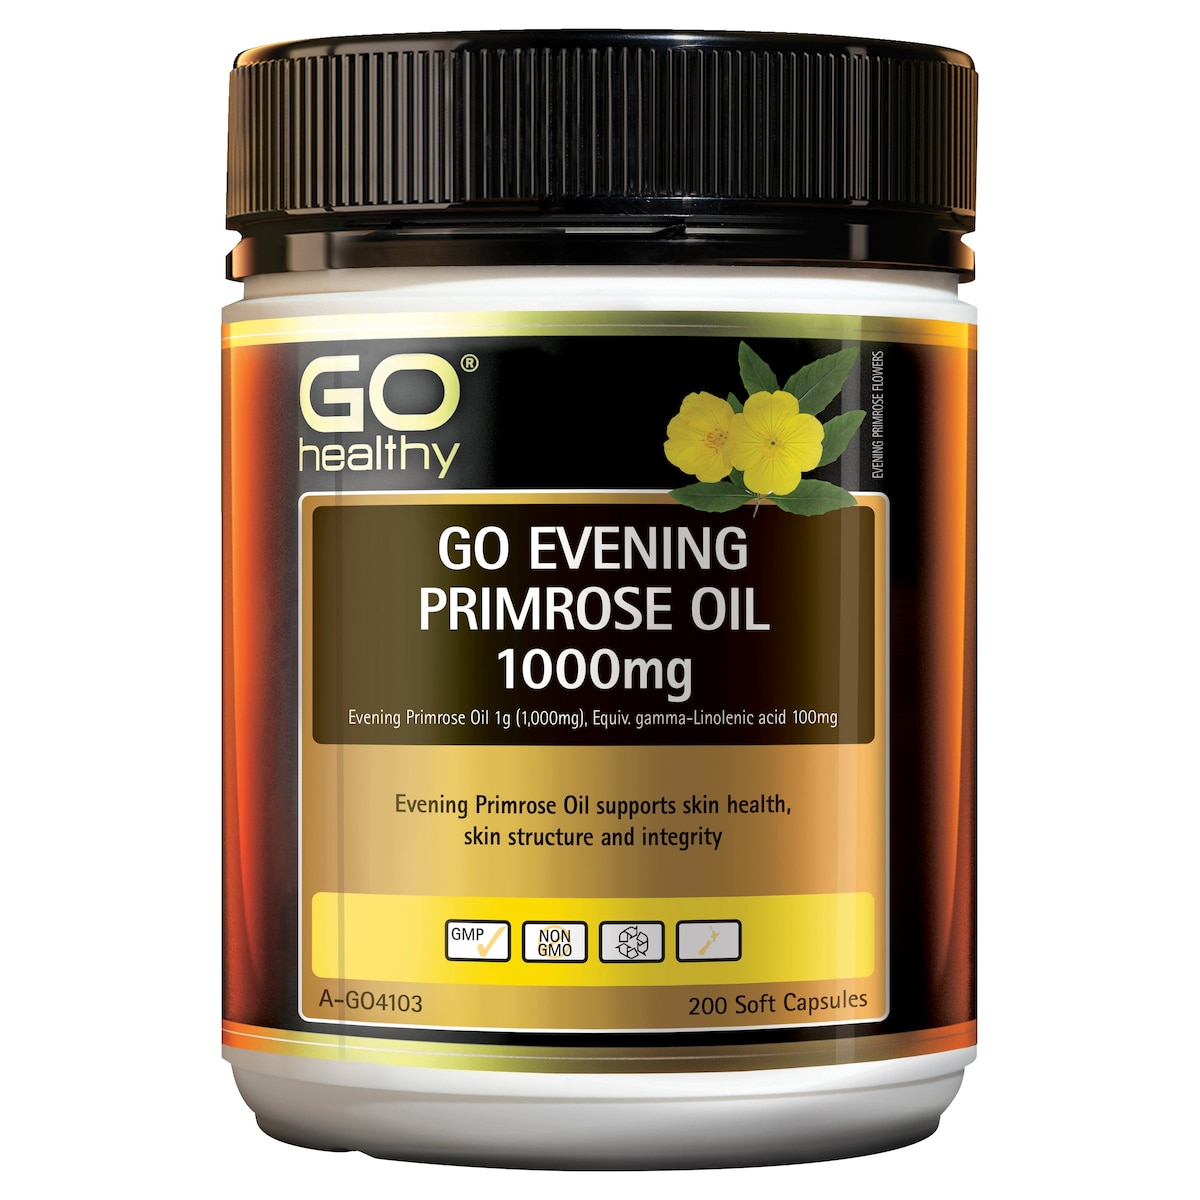 GO healthy Evening Primose Oil 1000mg 200 Capsules